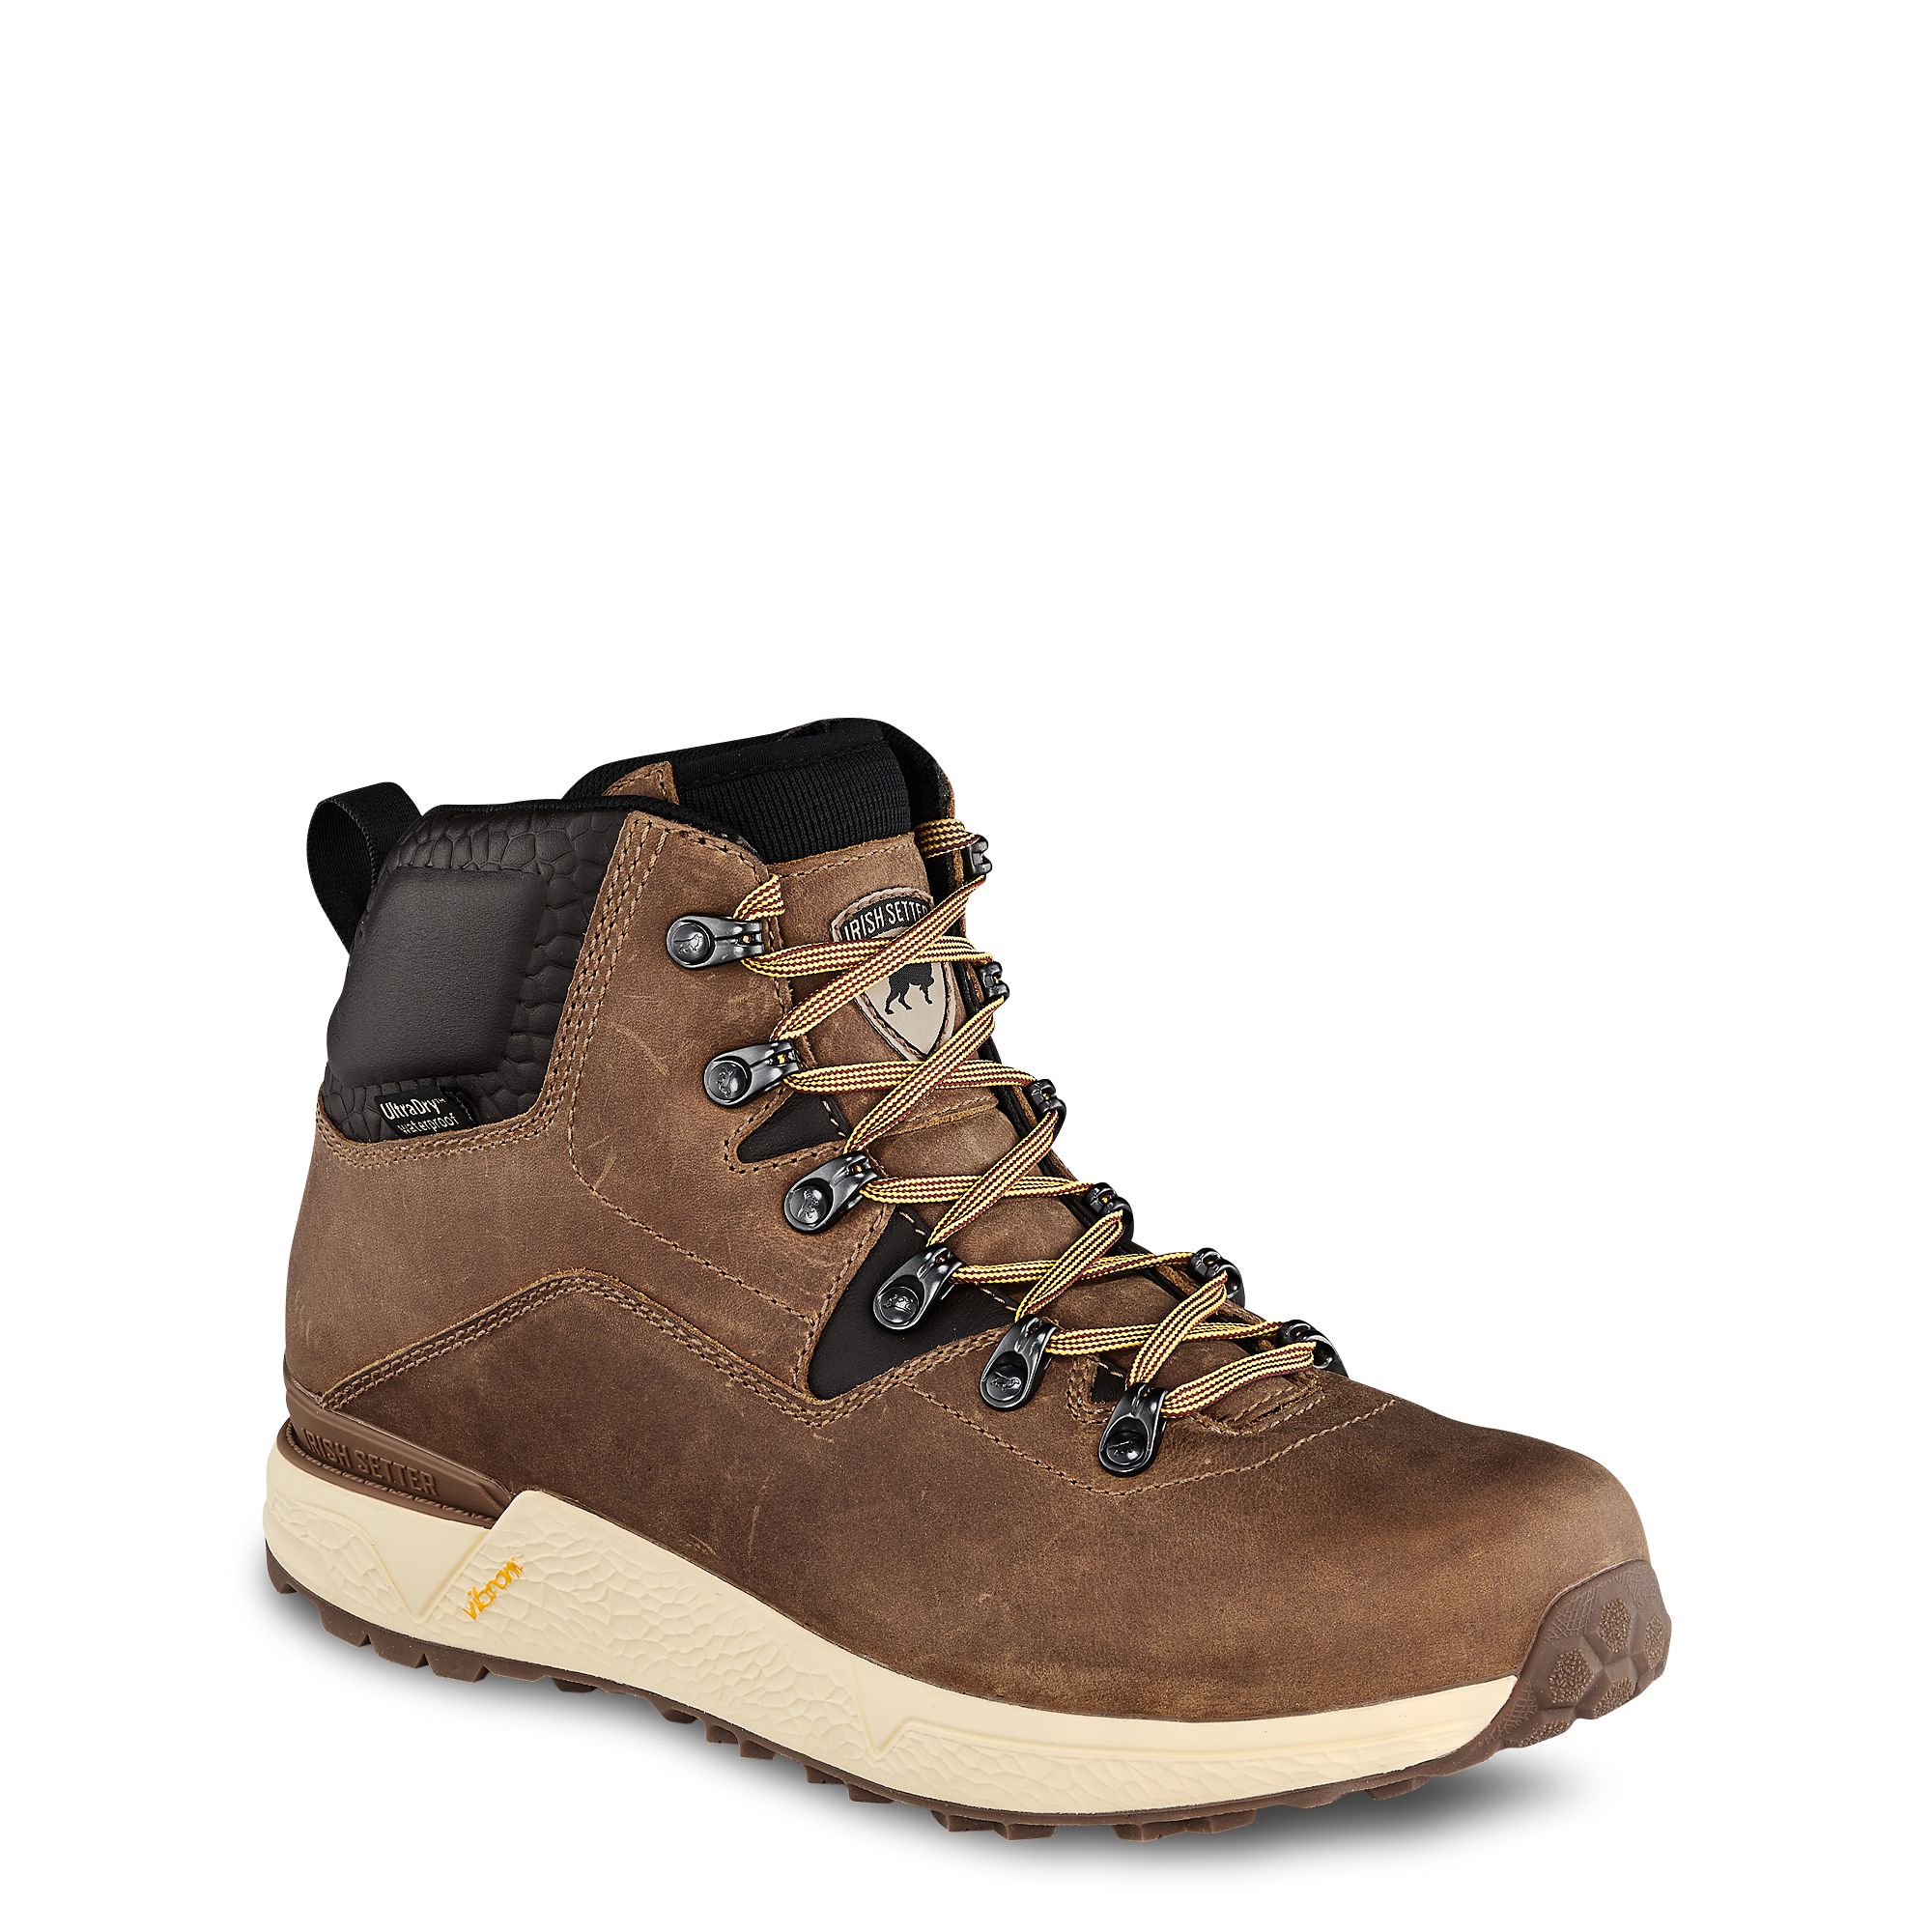 Style 2856 Canyons Hiker